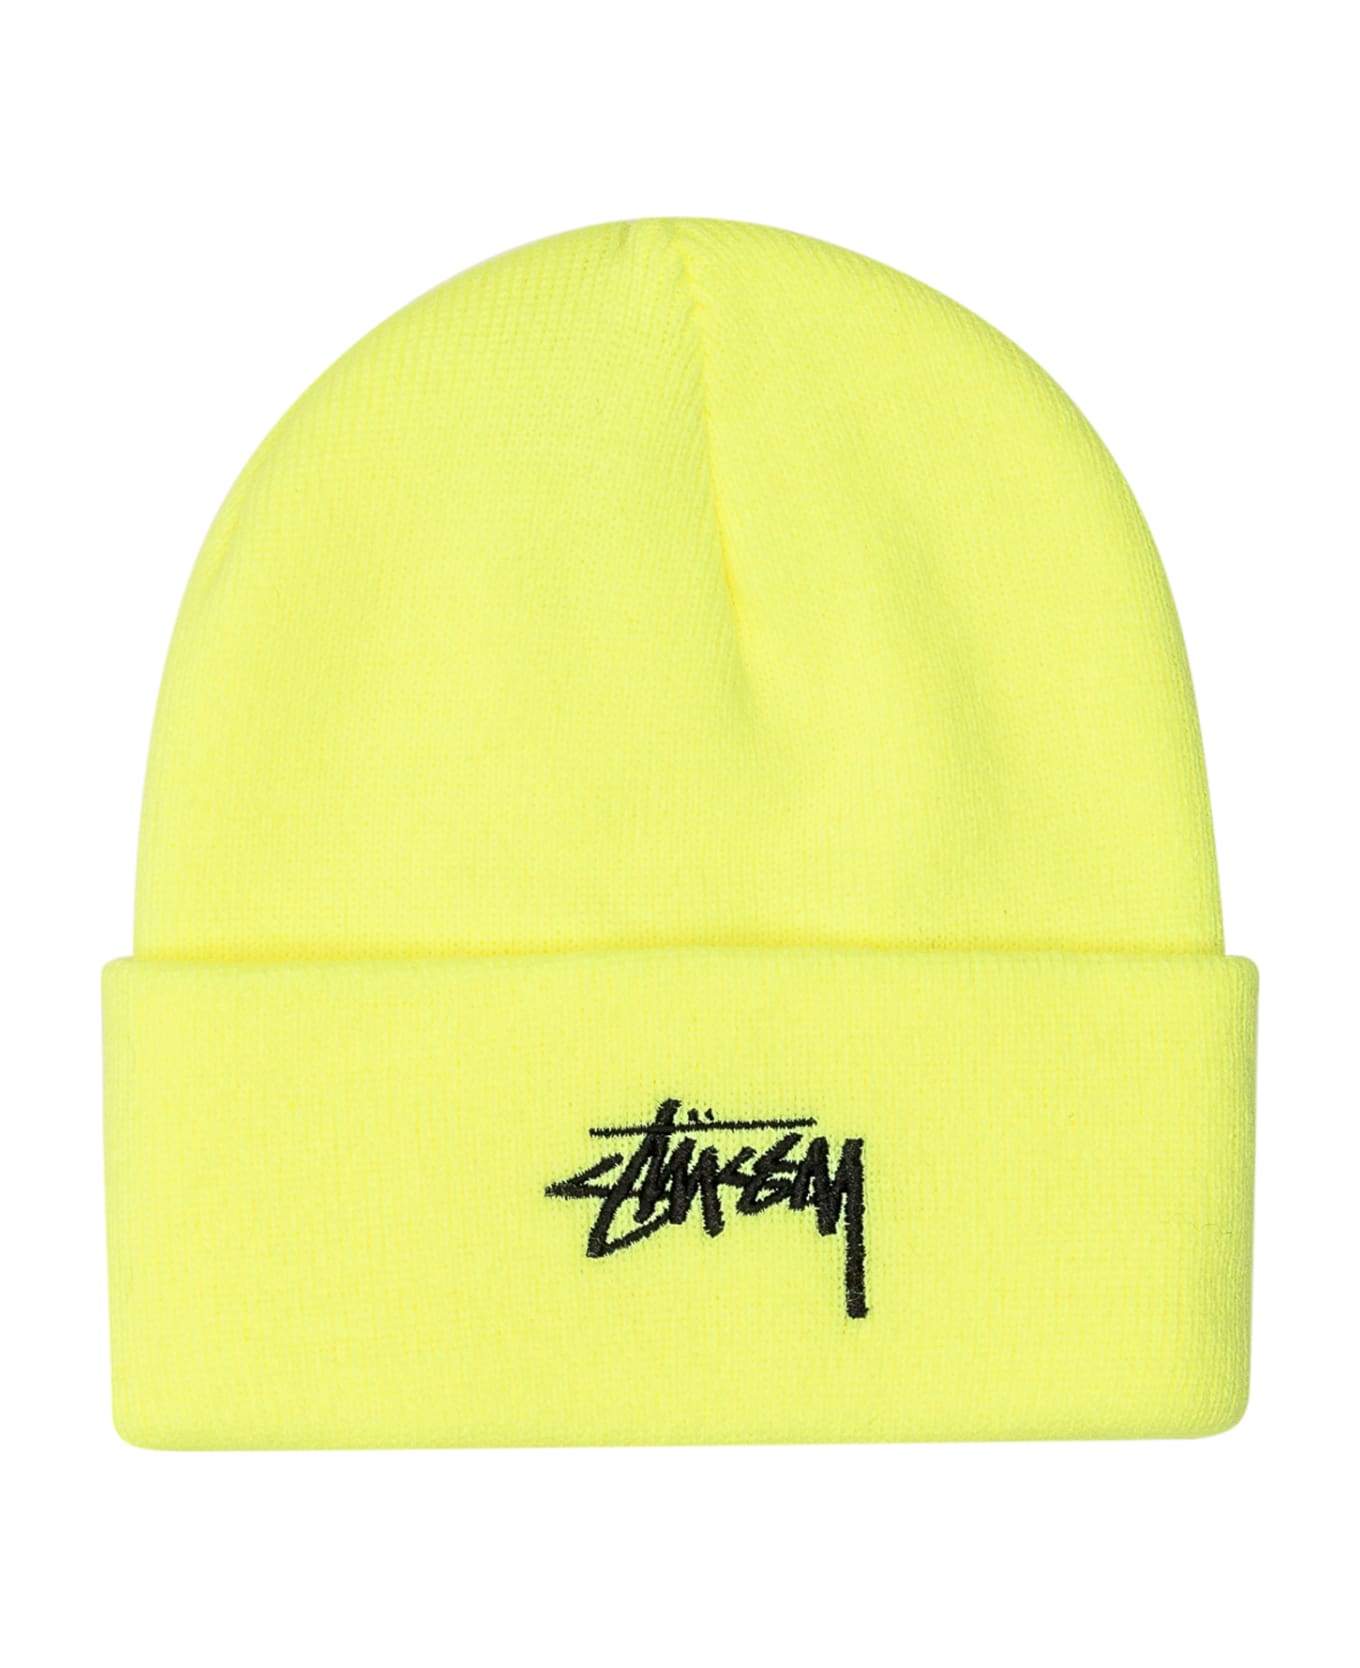 Stussy Hat With Logo - SAFETY YELLOW 帽子